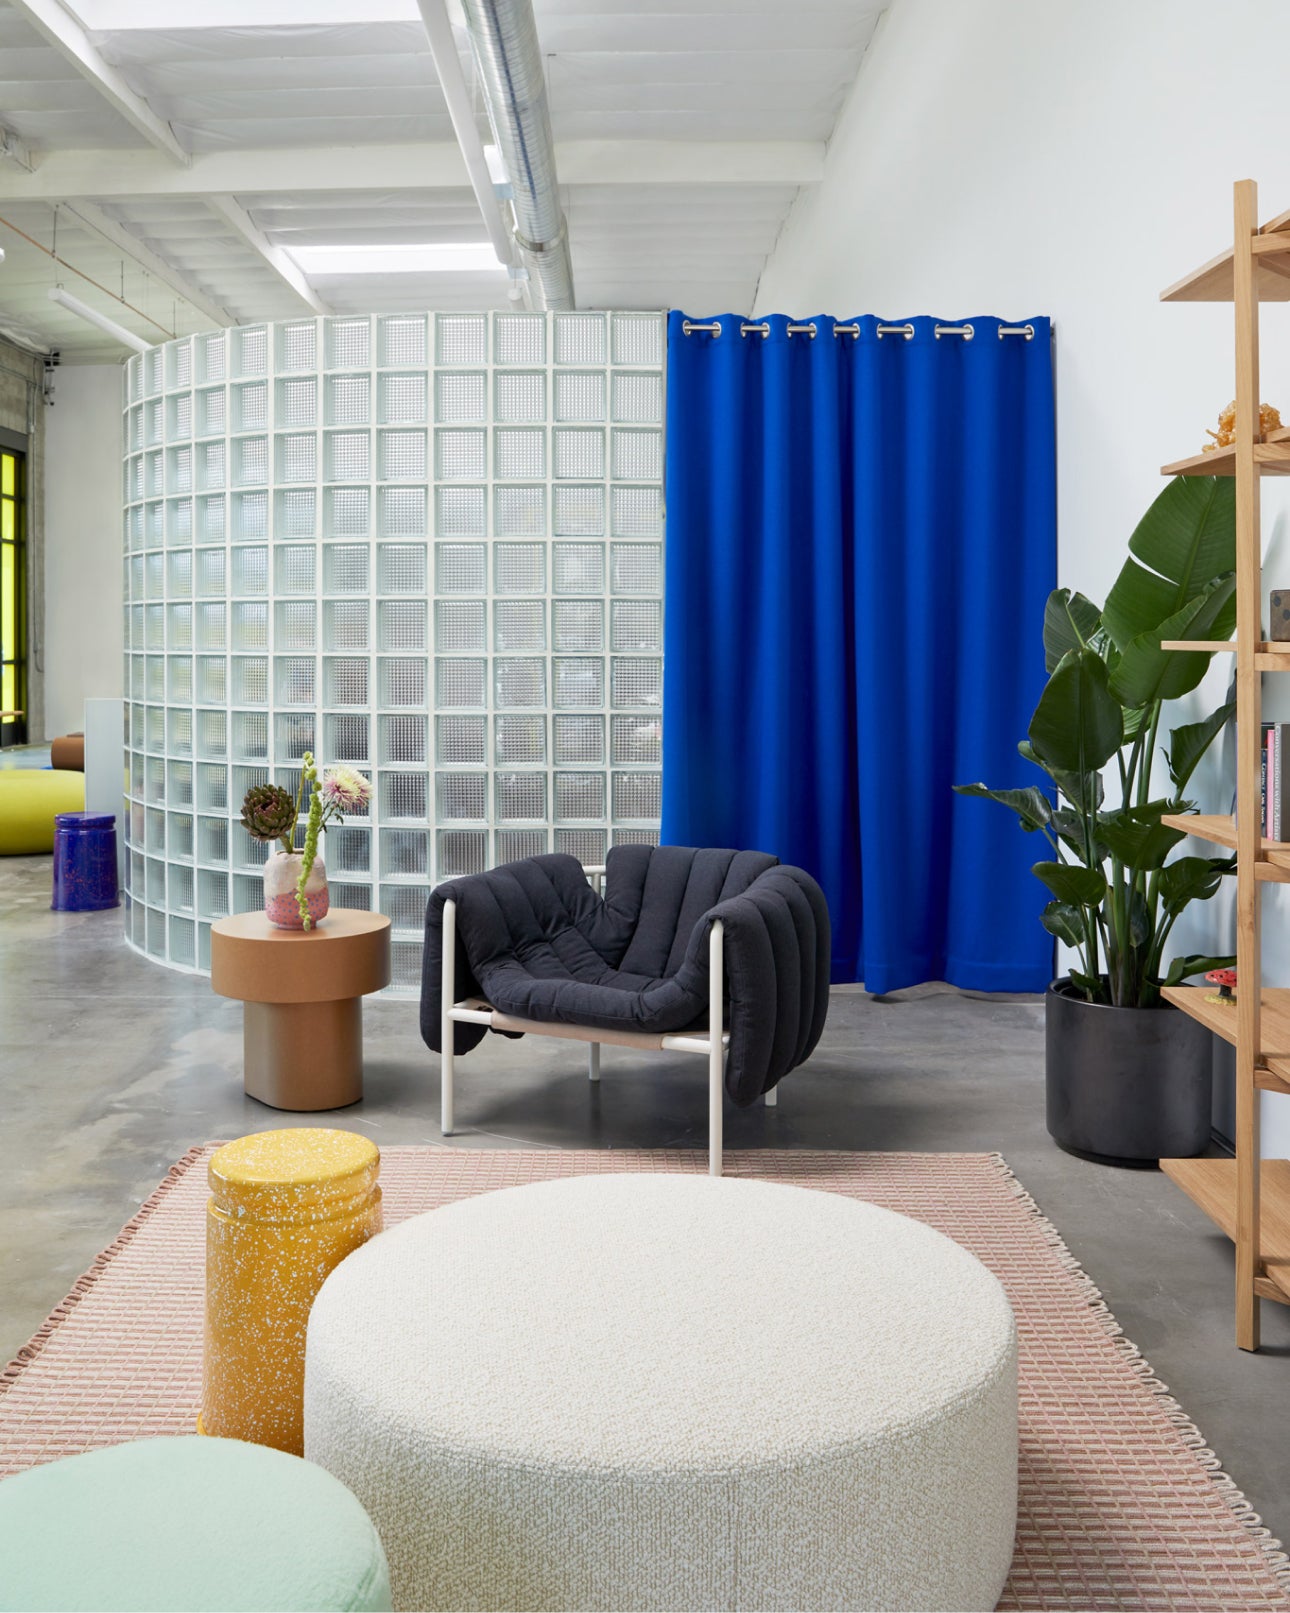 Hem - An image from our LA Showroom featuring Boa Pouf, Puffy Lounge Chair, Zig Zag High Shelf, Rope Rug Large, Stump Table, Bon Pouf Round Large, and more.